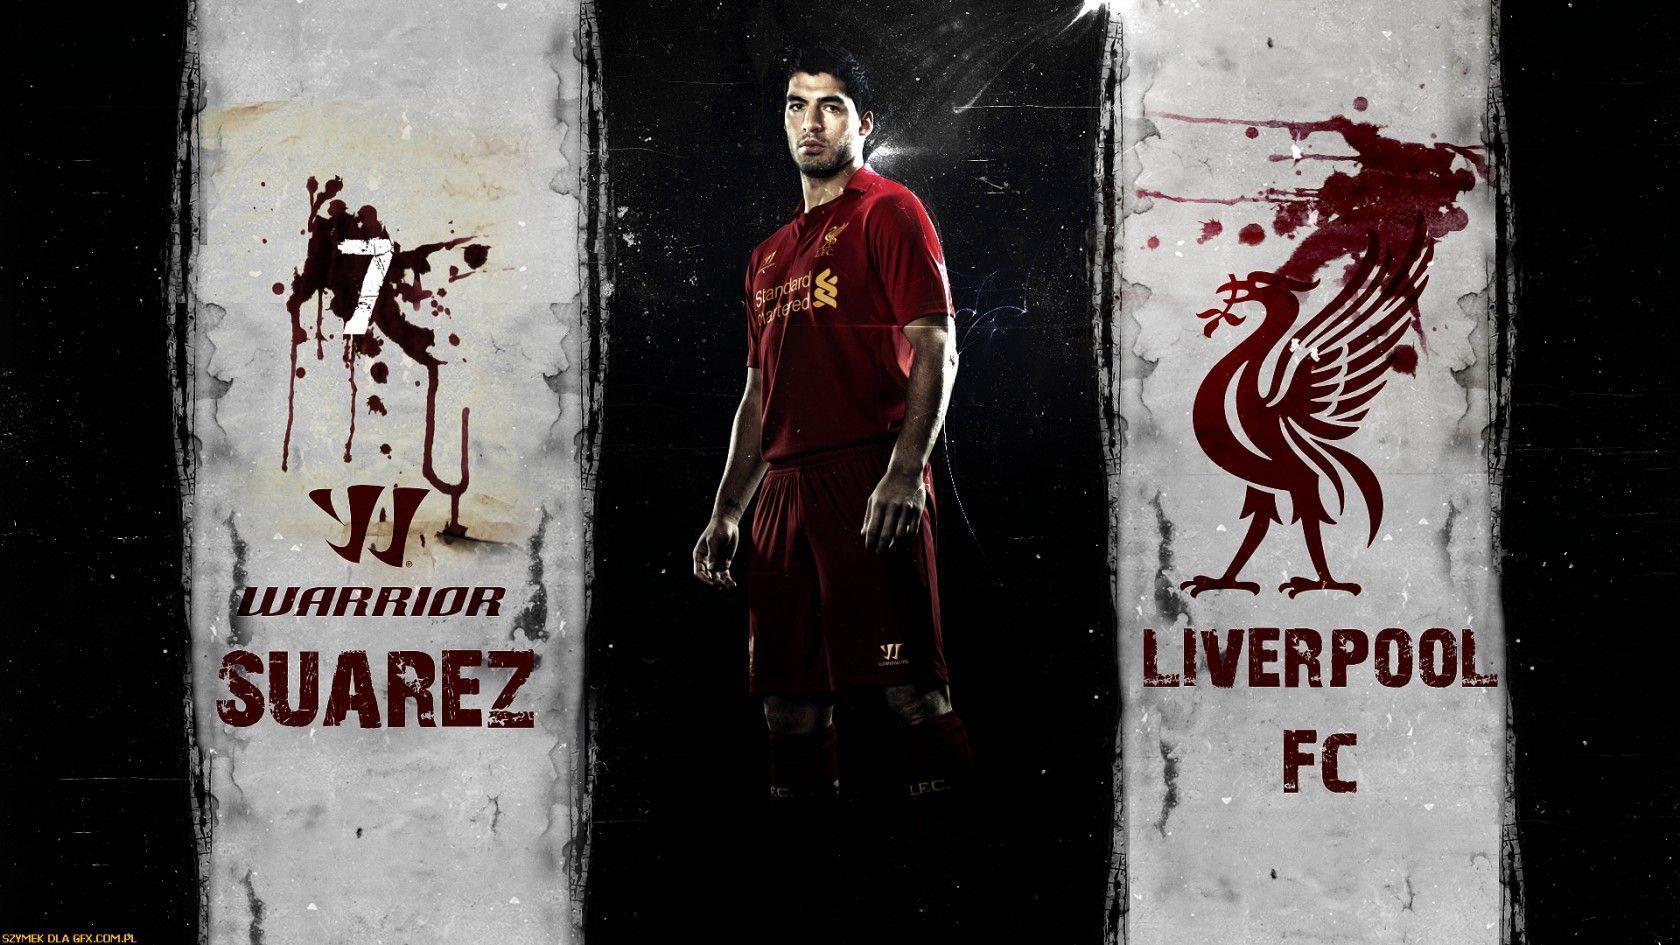 Top Liverpool Fc Wallpaper 2013 Images for Pinterest